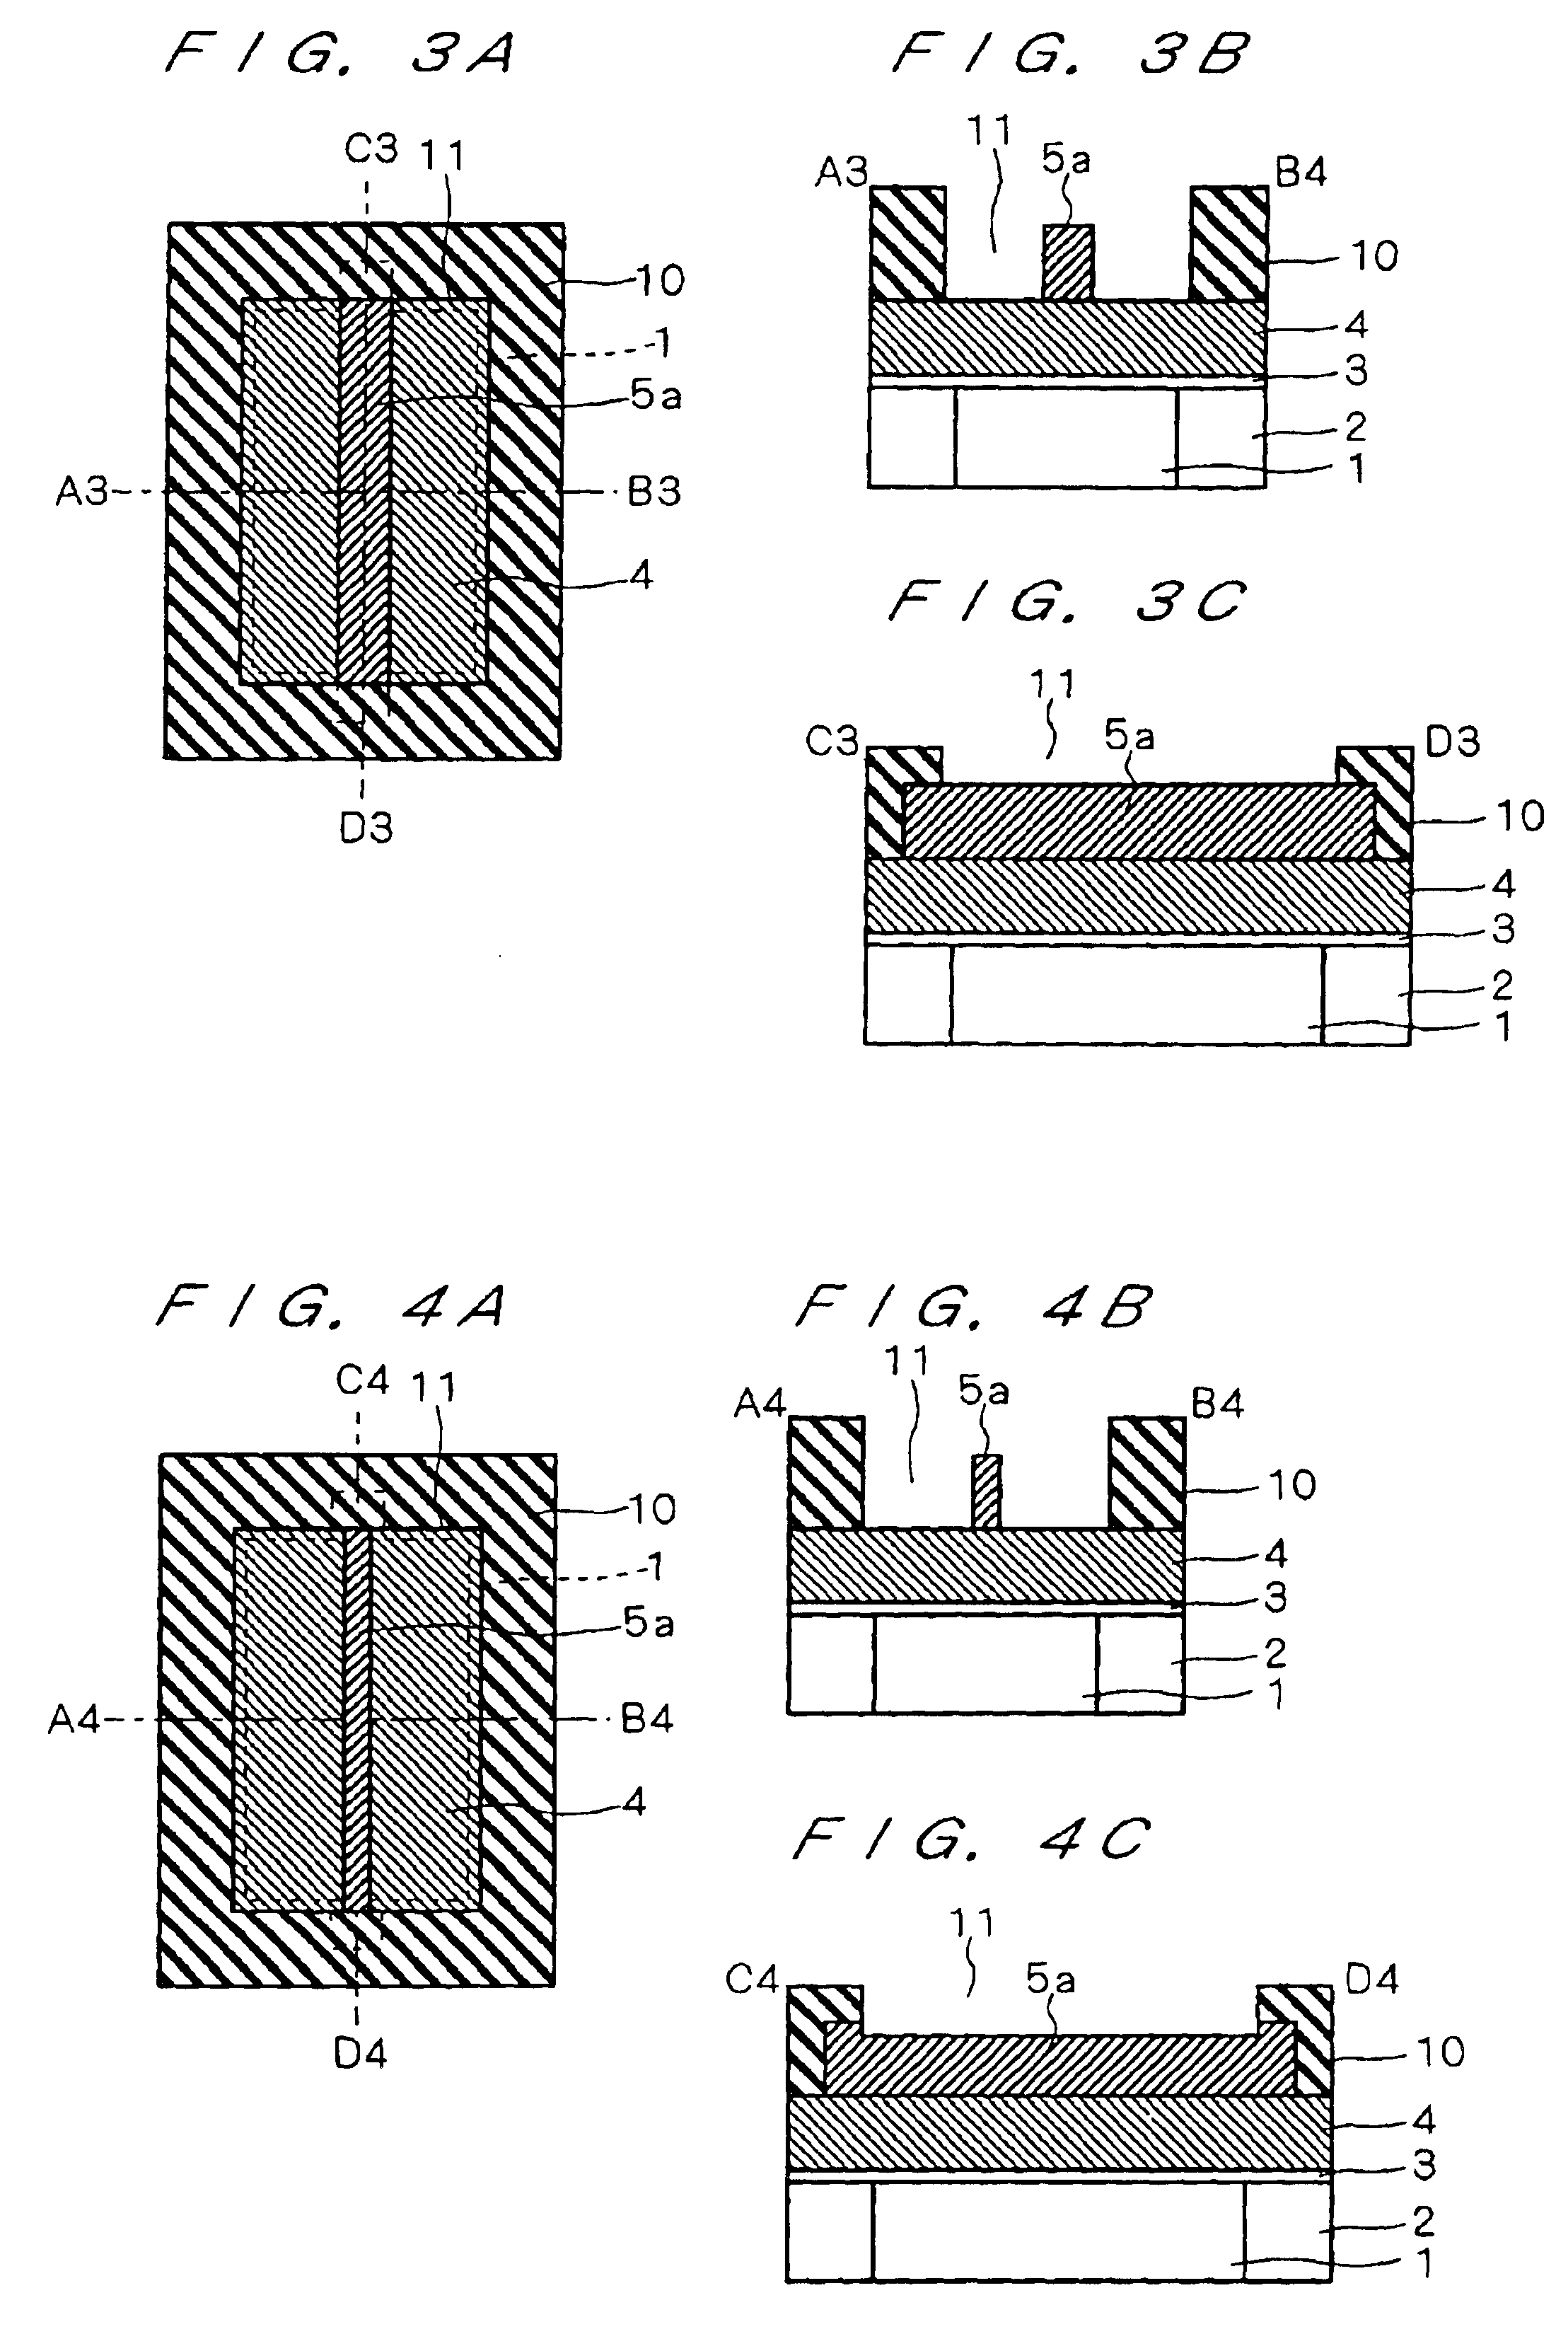 Method of manufacturing a thinned gate electrode utilizing protective films and etching